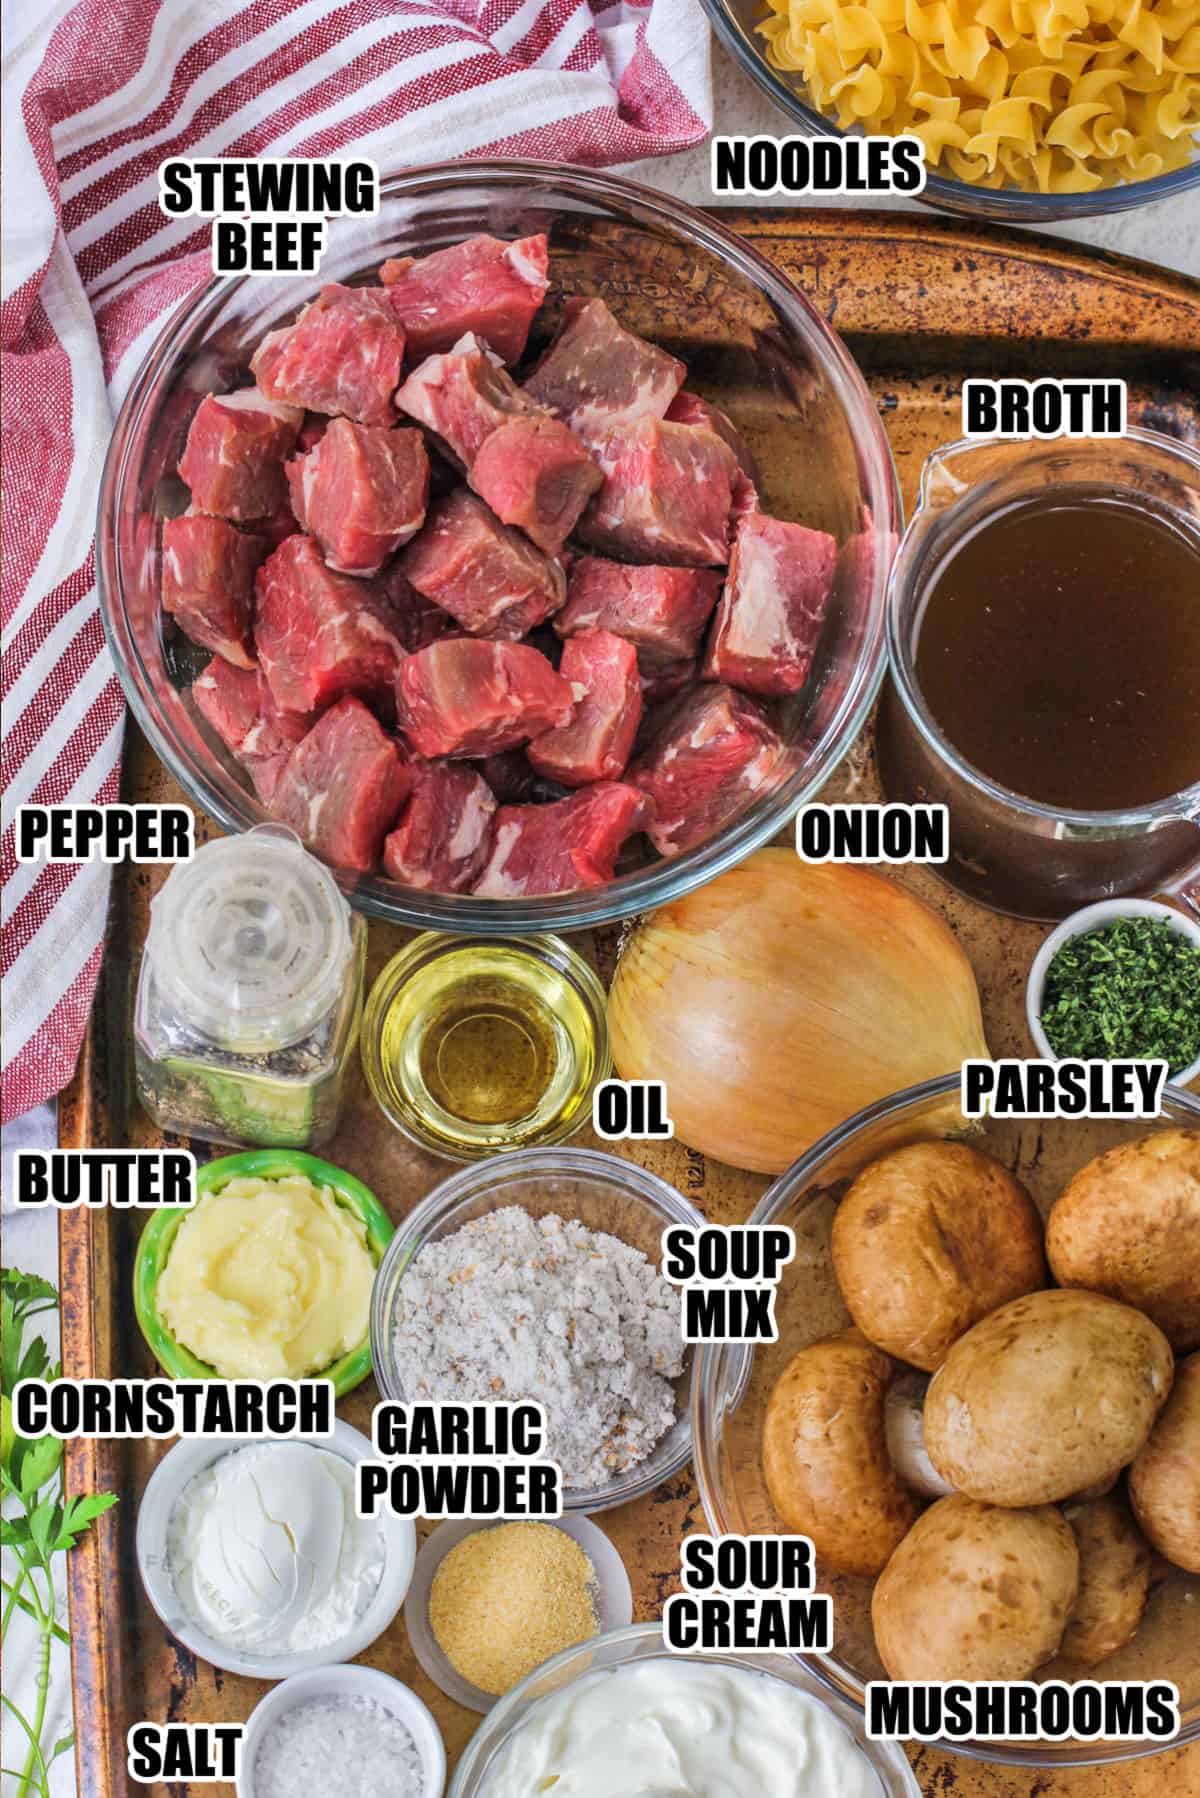 beef , noodles , broth , parsley , mushrooms , sour cream , oil , soup mix , garlic powder , butter, and seasonings to make Slow Cooker Beef Stroganoff with labels